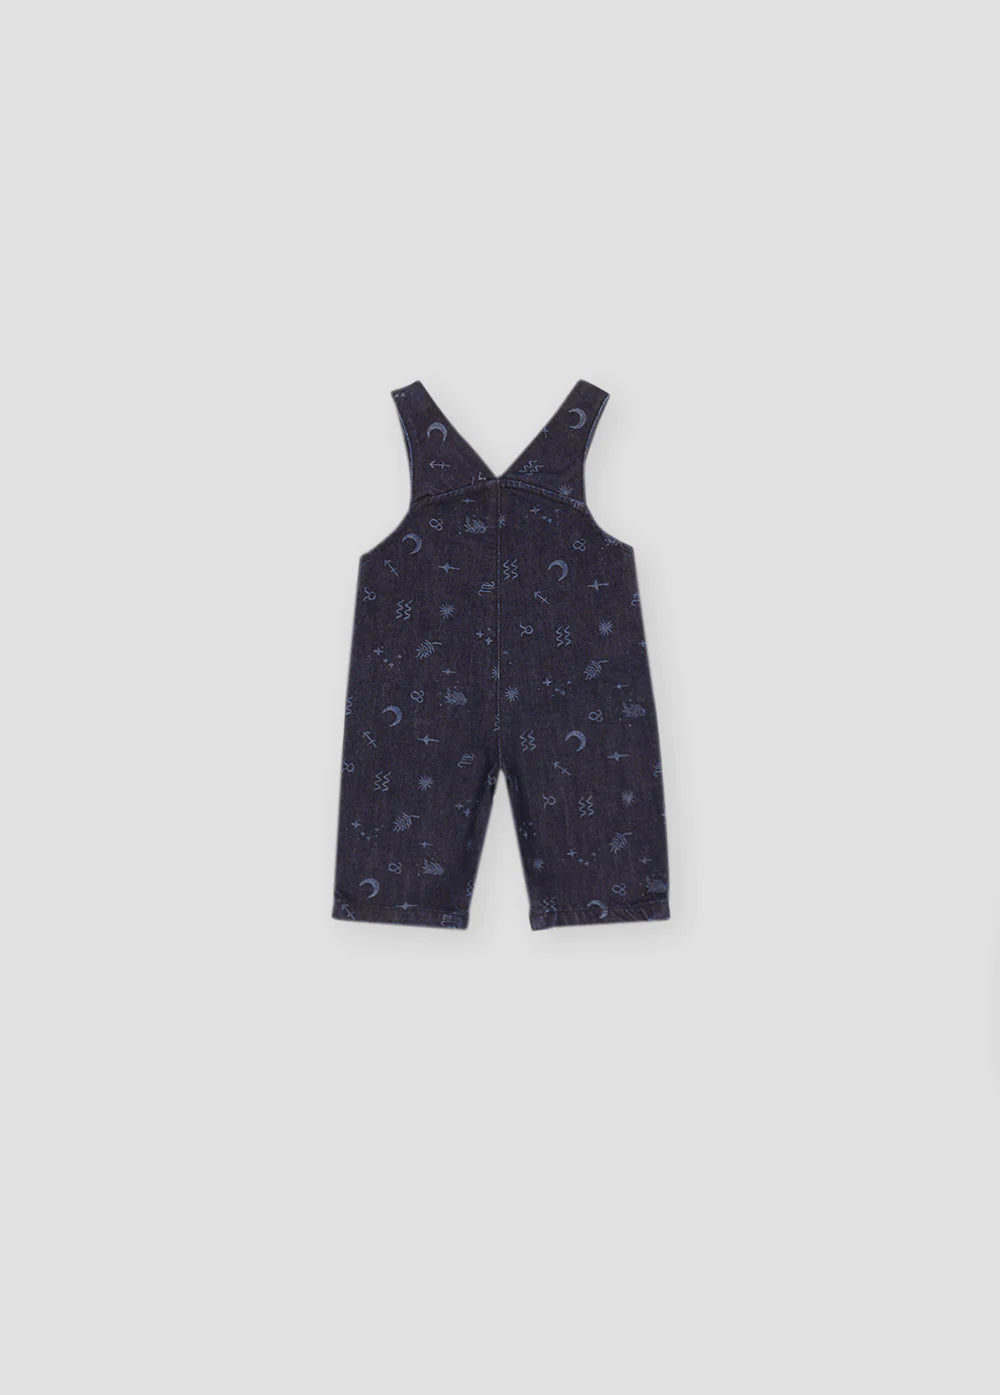 Cosmos Baby Overall - Cosmos Print